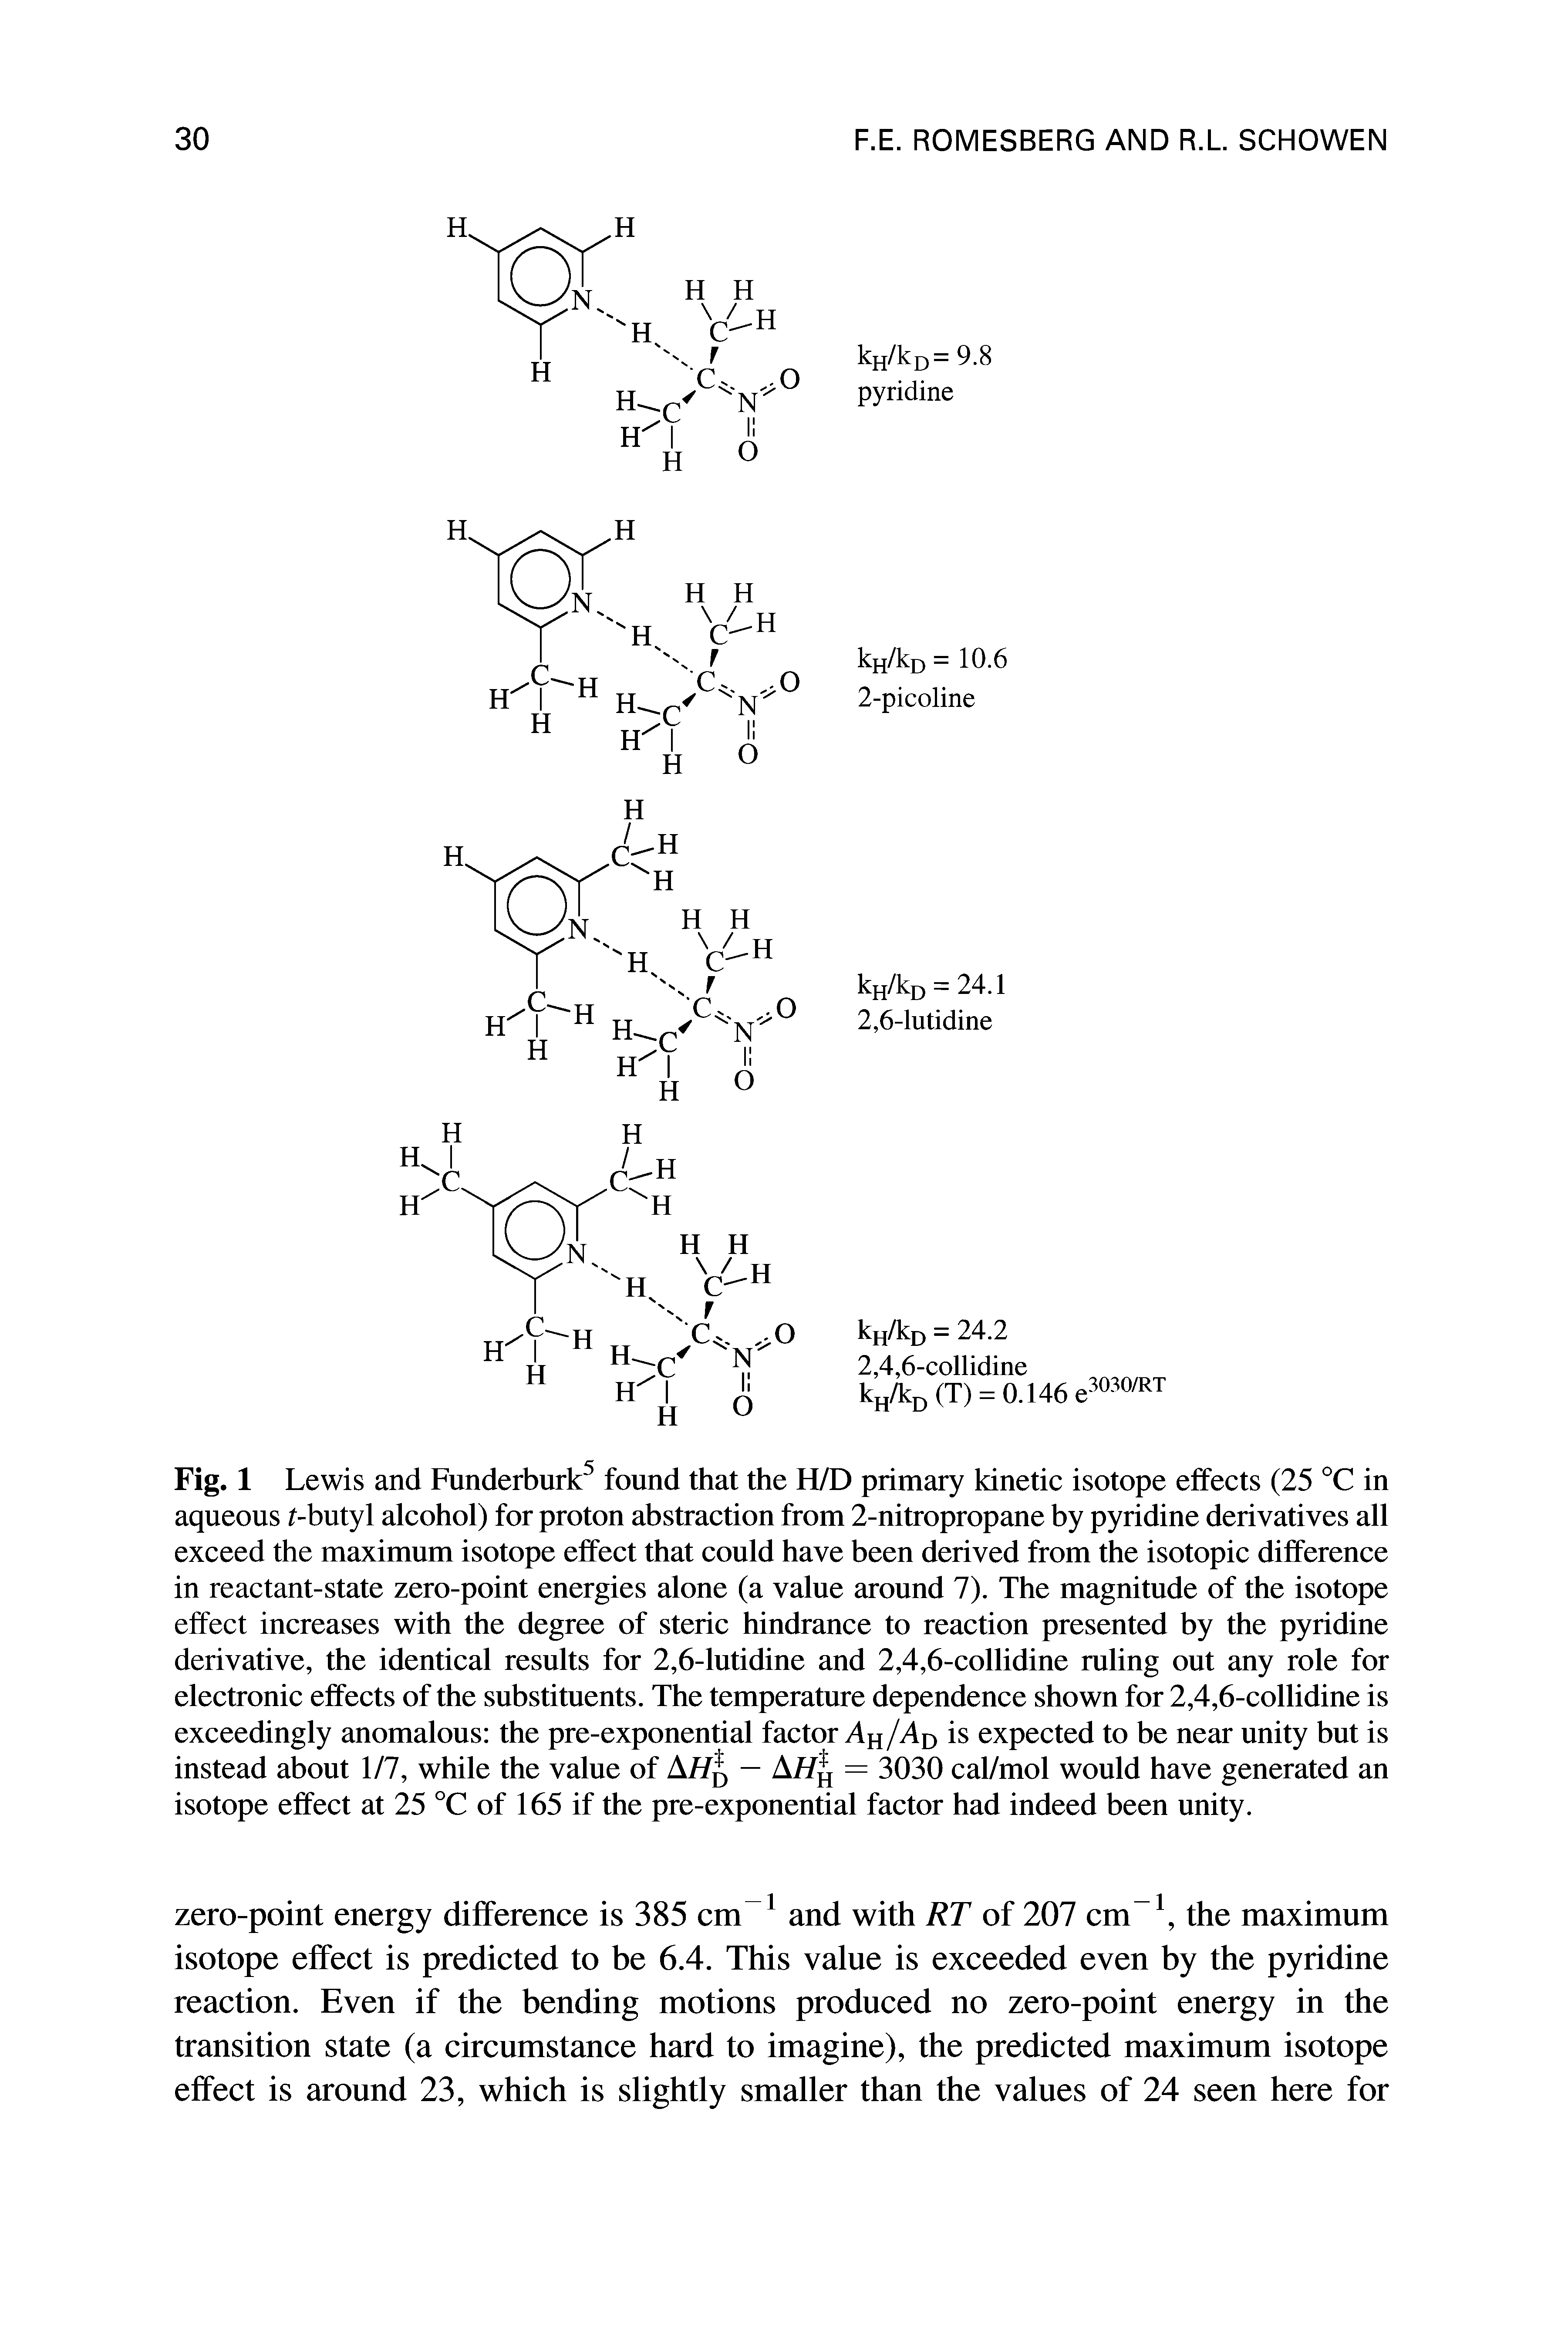 Fig. 1 Lewis and Funderburk found that the H/D primary kinetic isotope effects (25 °C in aqueous t-butyl alcohol) for proton abstraction from 2-nitropropane by pyridine derivatives all exceed the maximum isotope effect that could have been derived from the isotopic difference in reactant-state zero-point energies alone (a value around 7). The magnitude of the isotope effect increases with the degree of steric hindrance to reaction presented by the pyridine derivative, the identical results for 2,6-lutidine and 2,4,6-collidine ruling out any role for electronic effects of the substituents. The temperature dependence shown for 2,4,6-collidine is exceedingly anomalous the pre-exponential factor Ahis expected to be near unity but is instead about 1/7, while the value of AH — AH = 3030 cal/mol would have generated an isotope effect at 25 °C of 165 if the pre-exponential factor had indeed been unity.